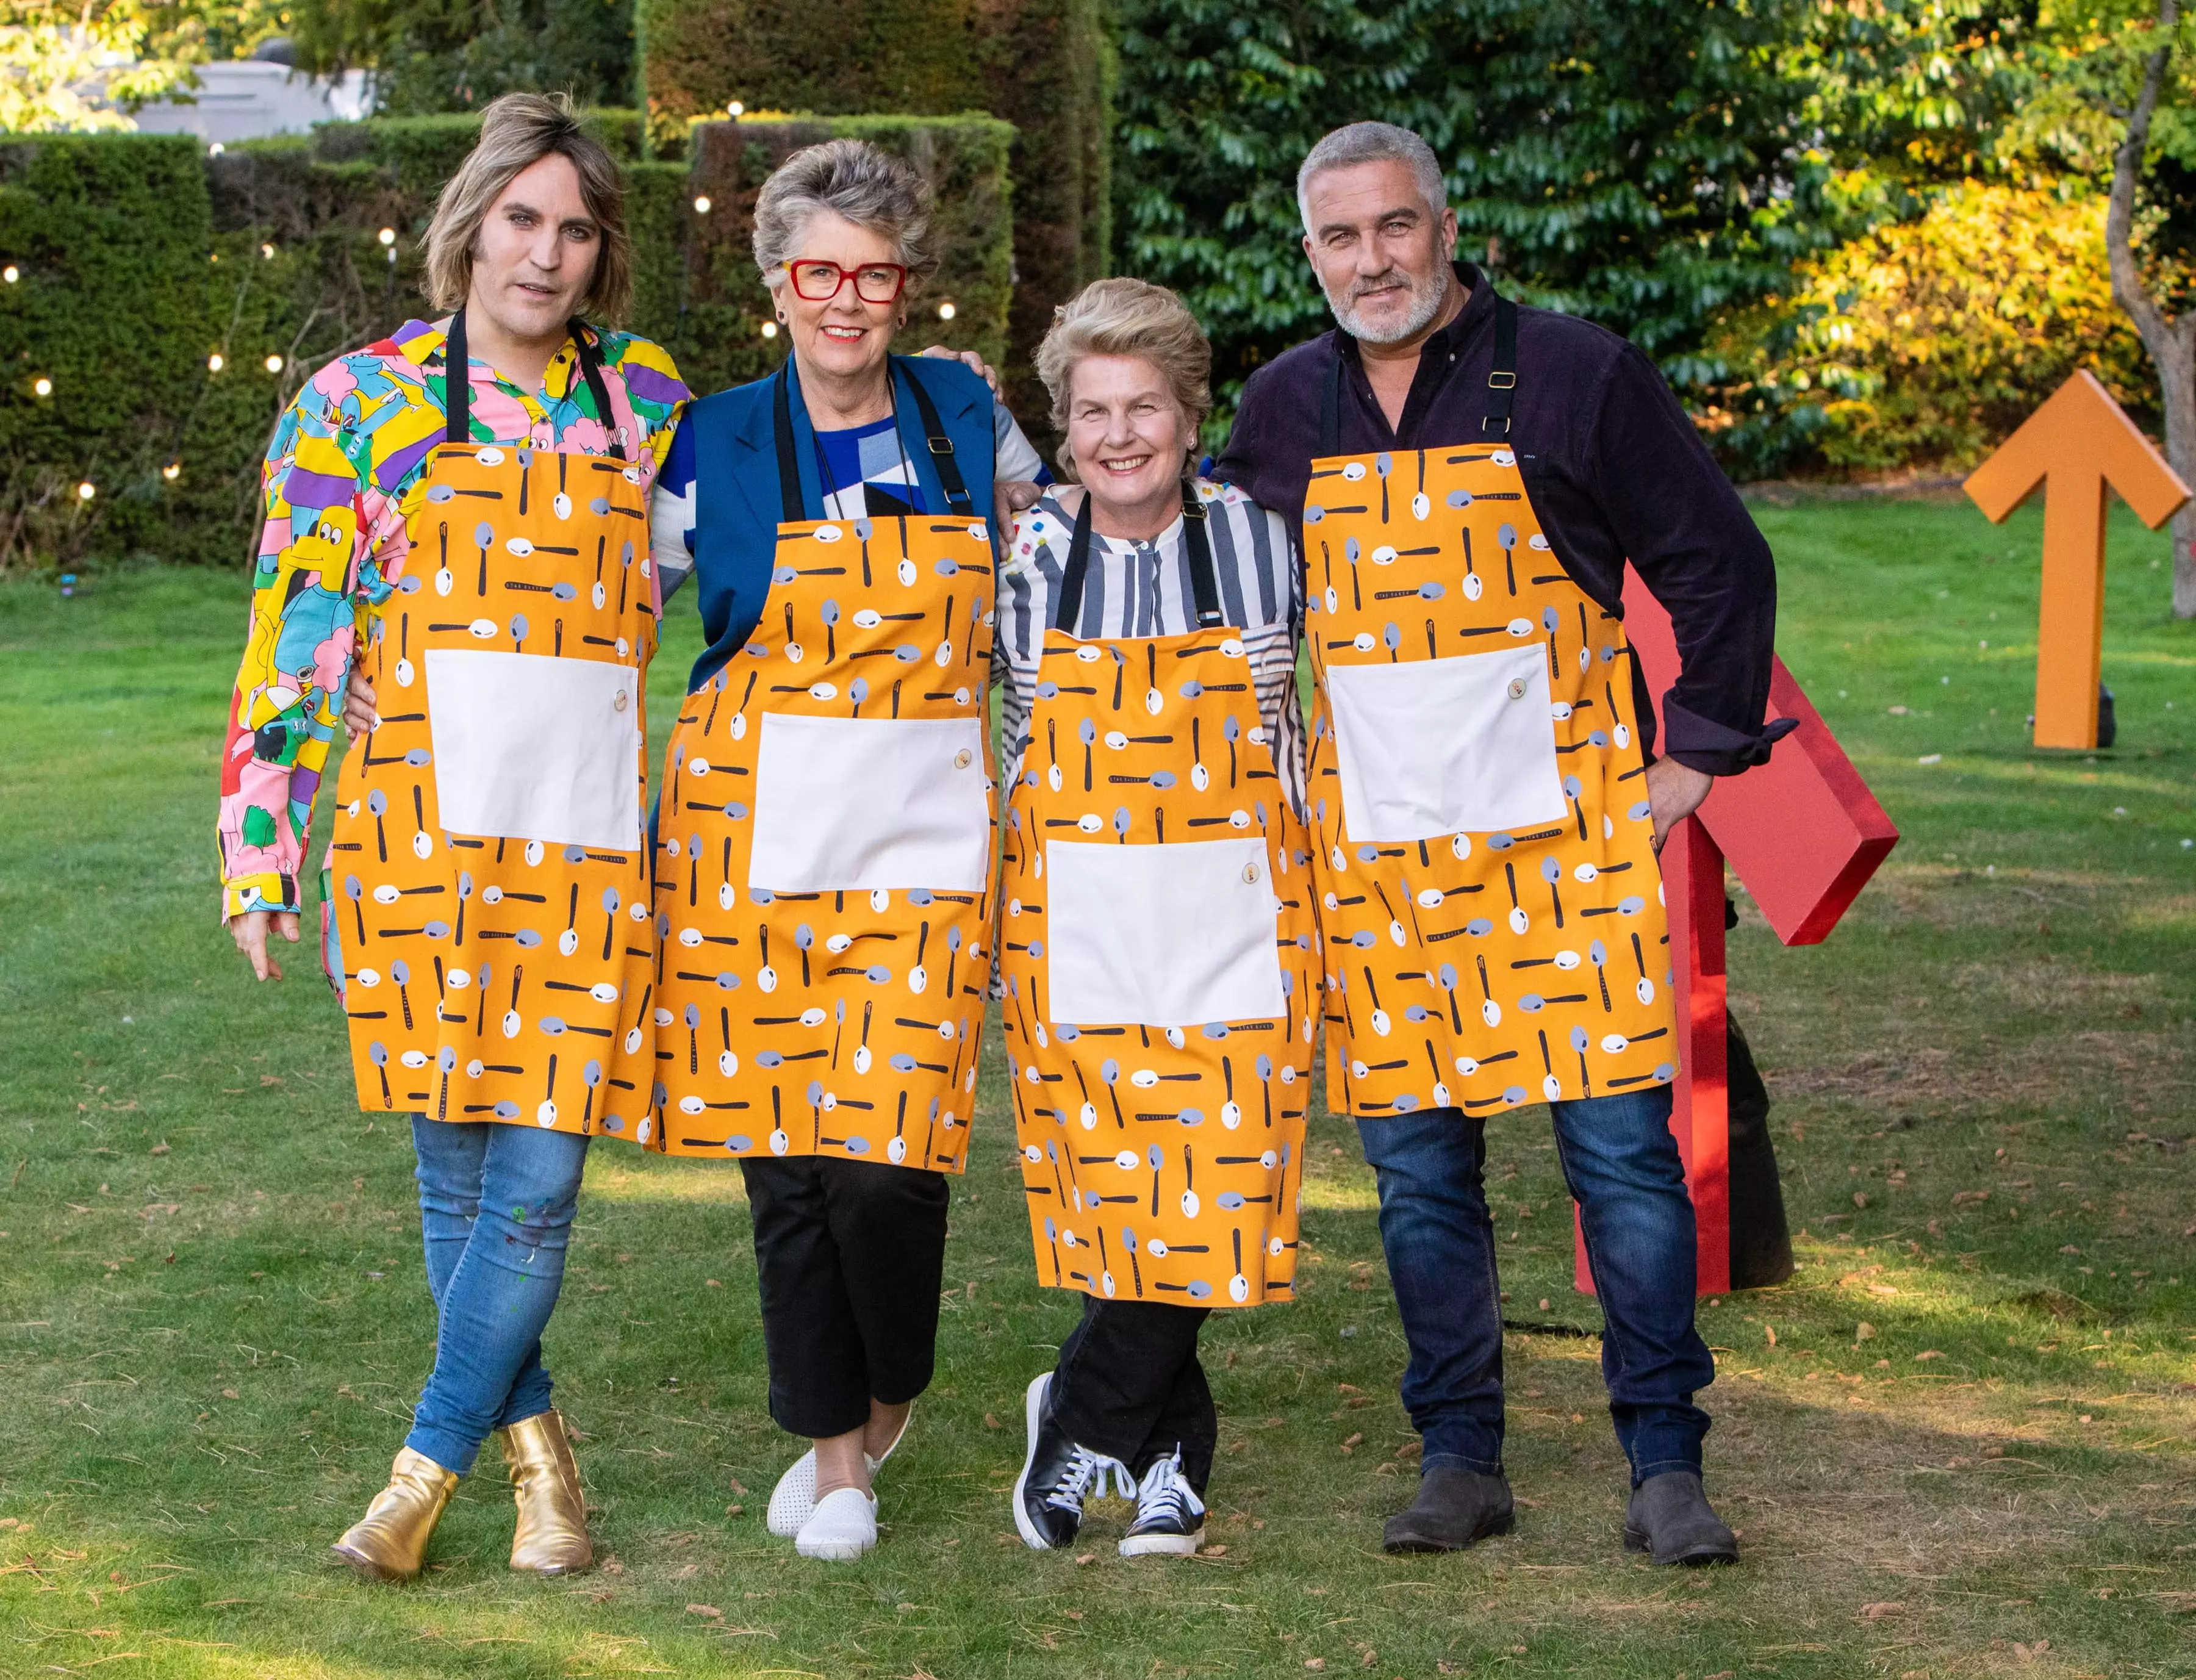 'The Great Celebrity Bake Off' for Stand Up To Cancer started last week (